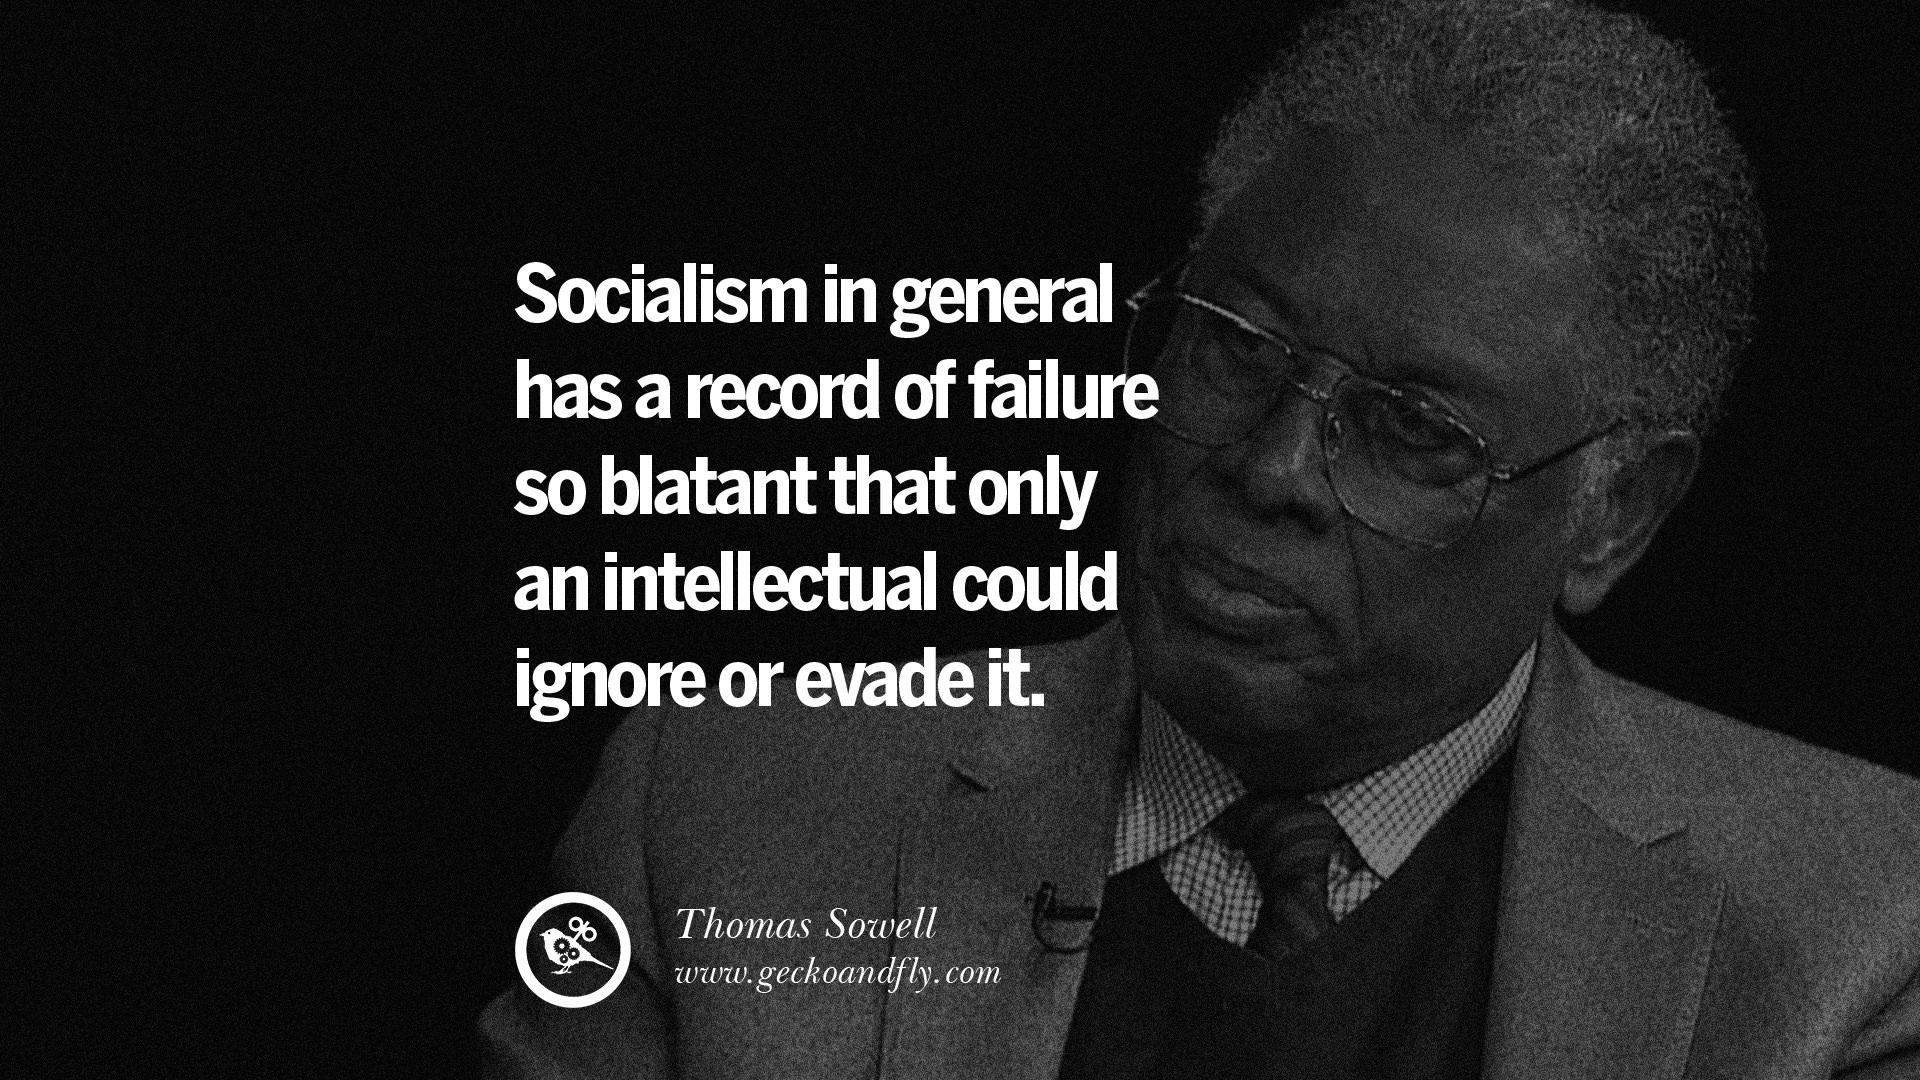 14 Anti-Socialism Quotes On Free Medical Healthcare, Minimum Wage, And